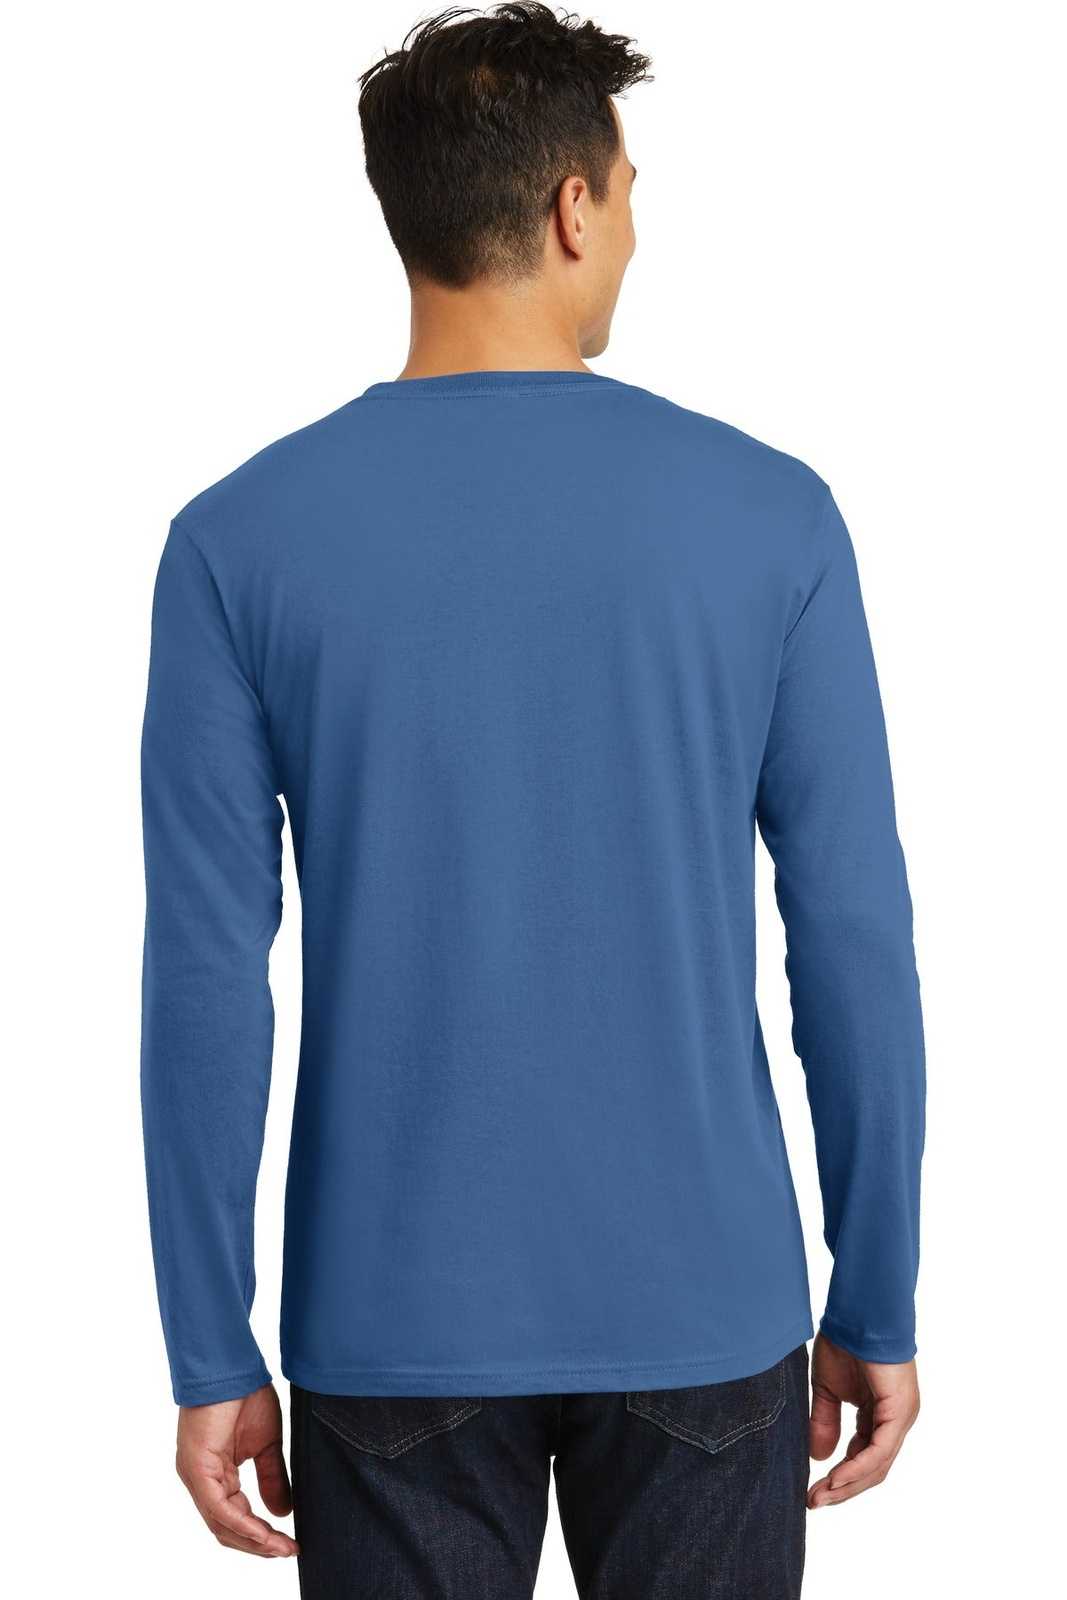 District DT105 Perfect Weight Long Sleeve Tee - Maritime Blue - HIT a Double - 2